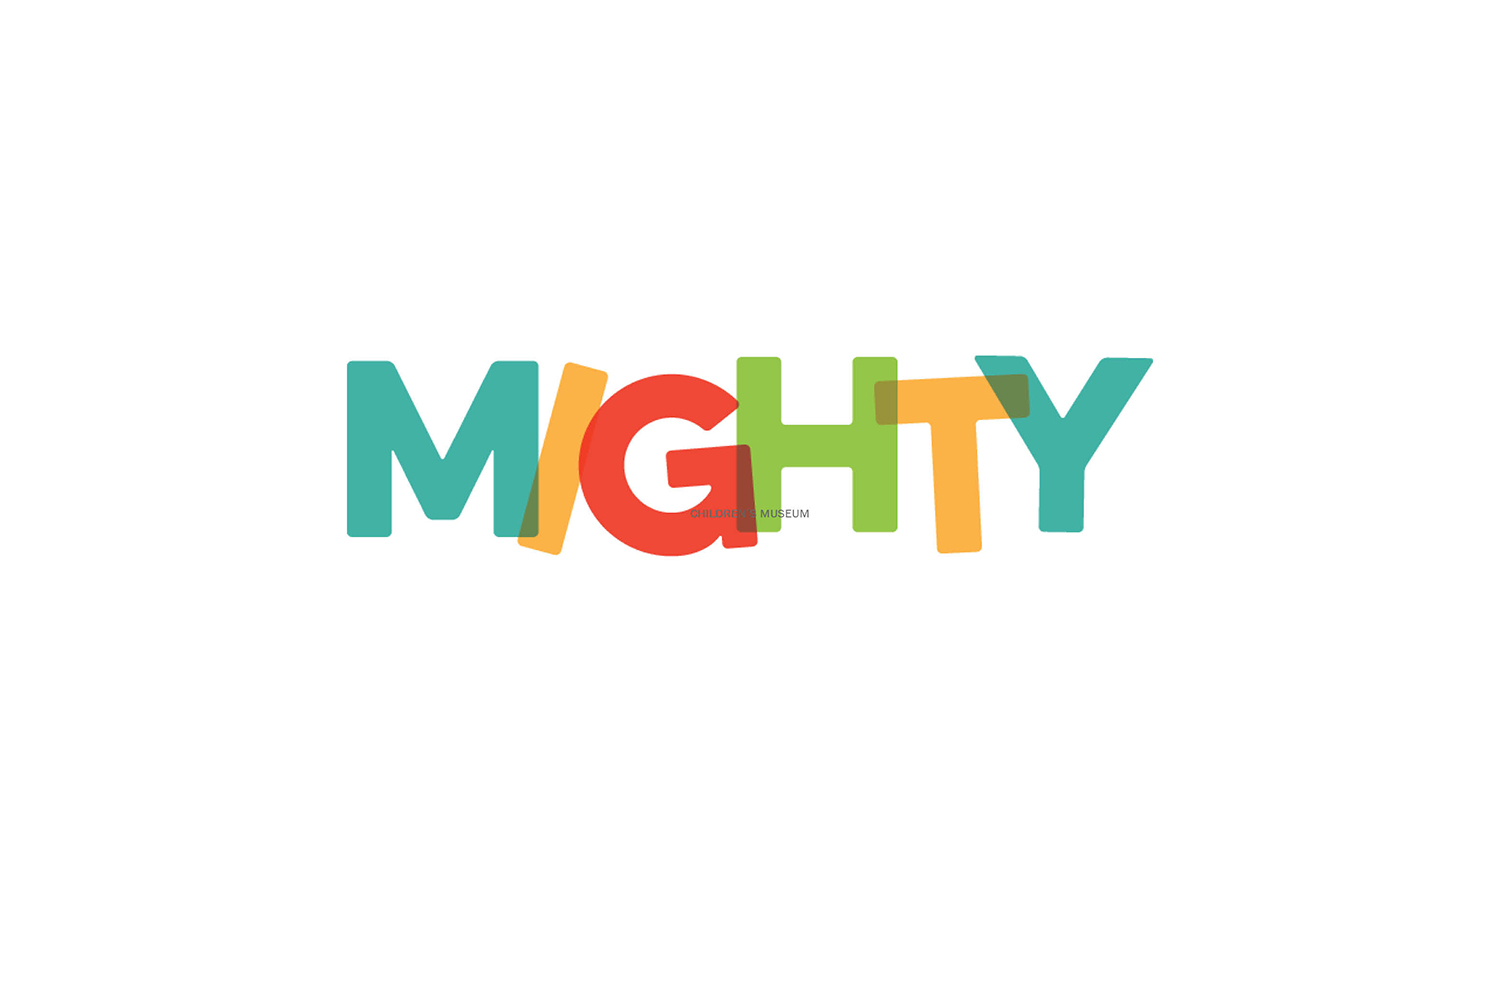 Boss_Display_Client_Mighty_Childrens_Museum_Logo.jpg